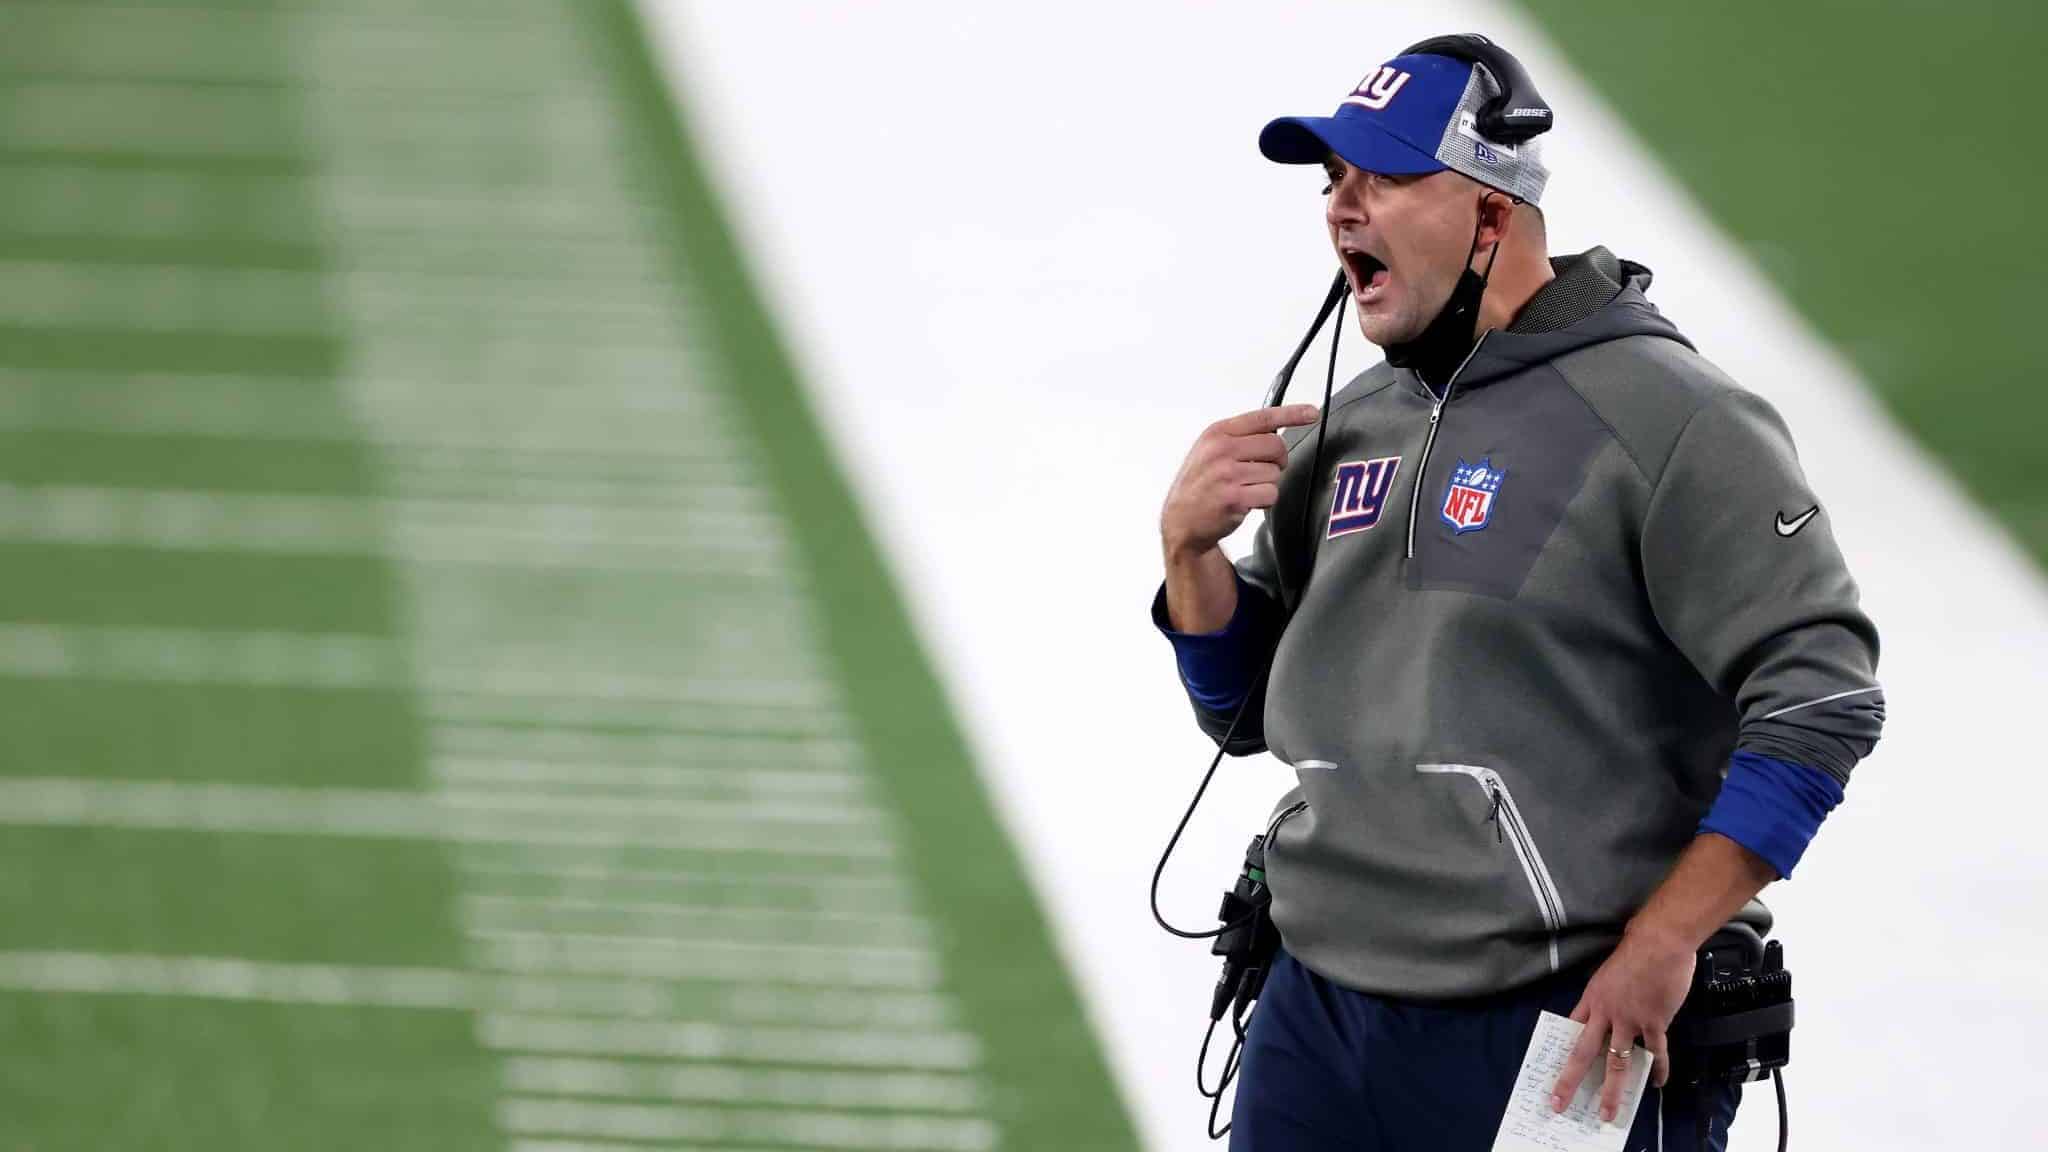 EAST RUTHERFORD, NEW JERSEY - SEPTEMBER 14: Head coach Joe Judge of the New York Giants reacts against the Pittsburgh Steelers during the second quarter in the game at MetLife Stadium on September 14, 2020 in East Rutherford, New Jersey.